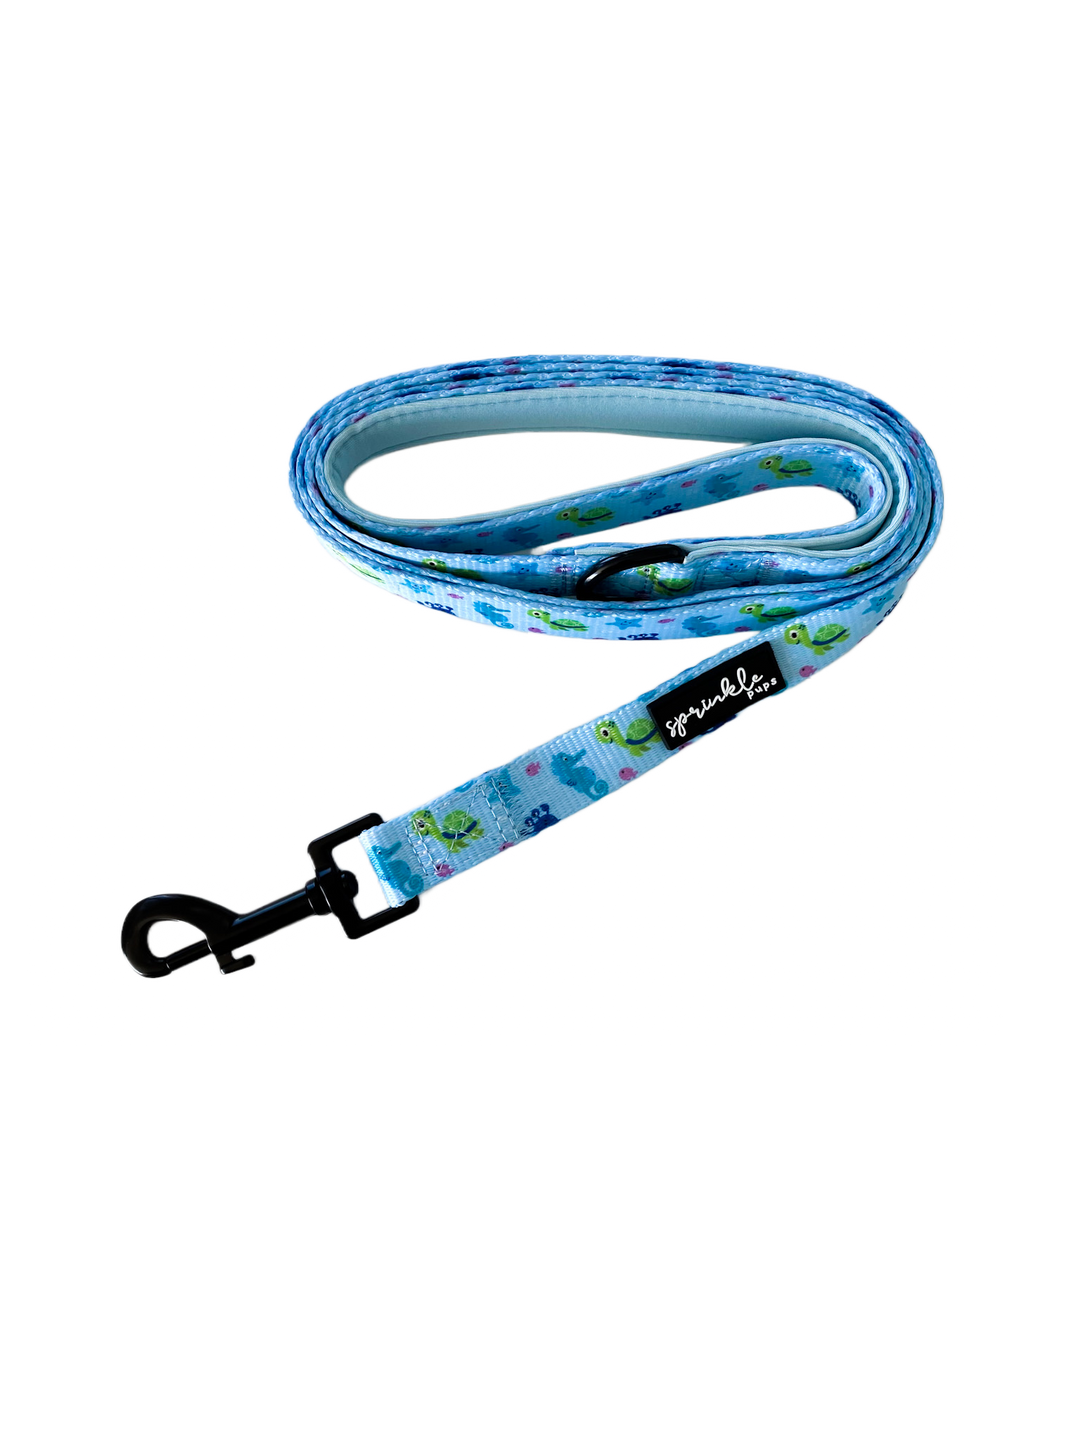 Bundle - Under the Sea Matching Harness and Leash Set